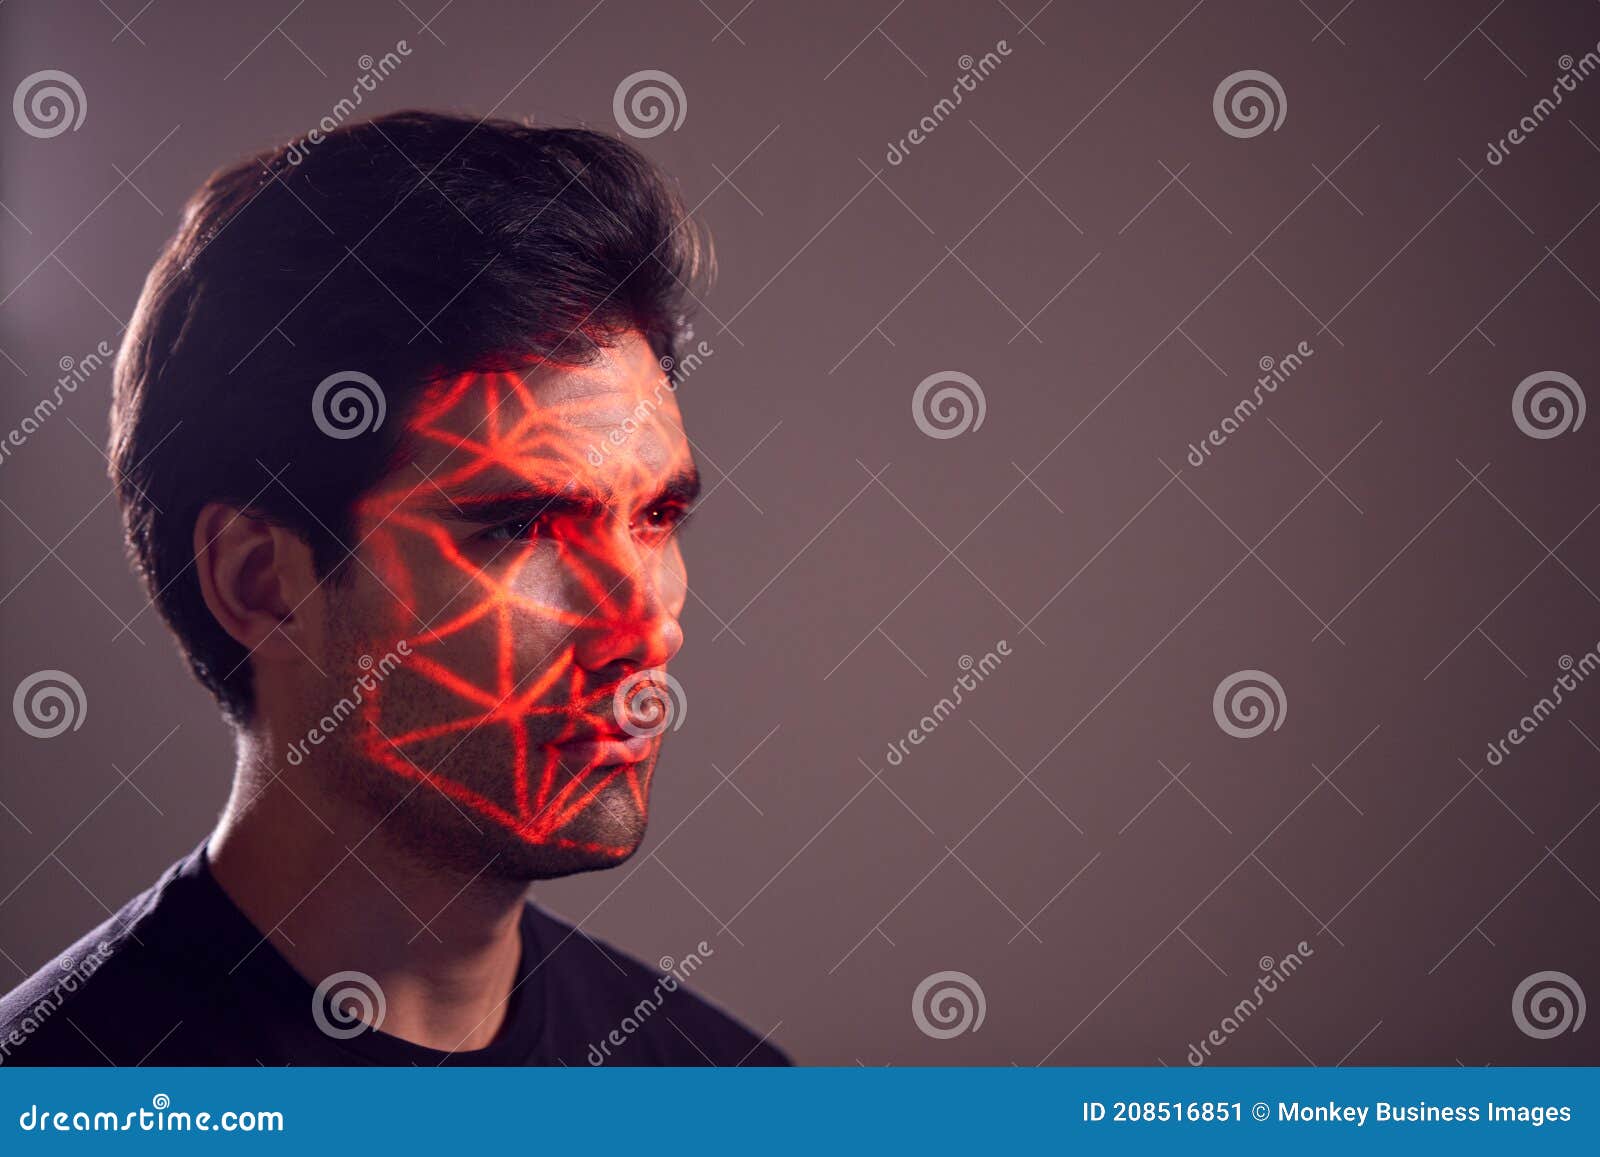 facial recognition technology concept as man has red grid projected onto face in studio